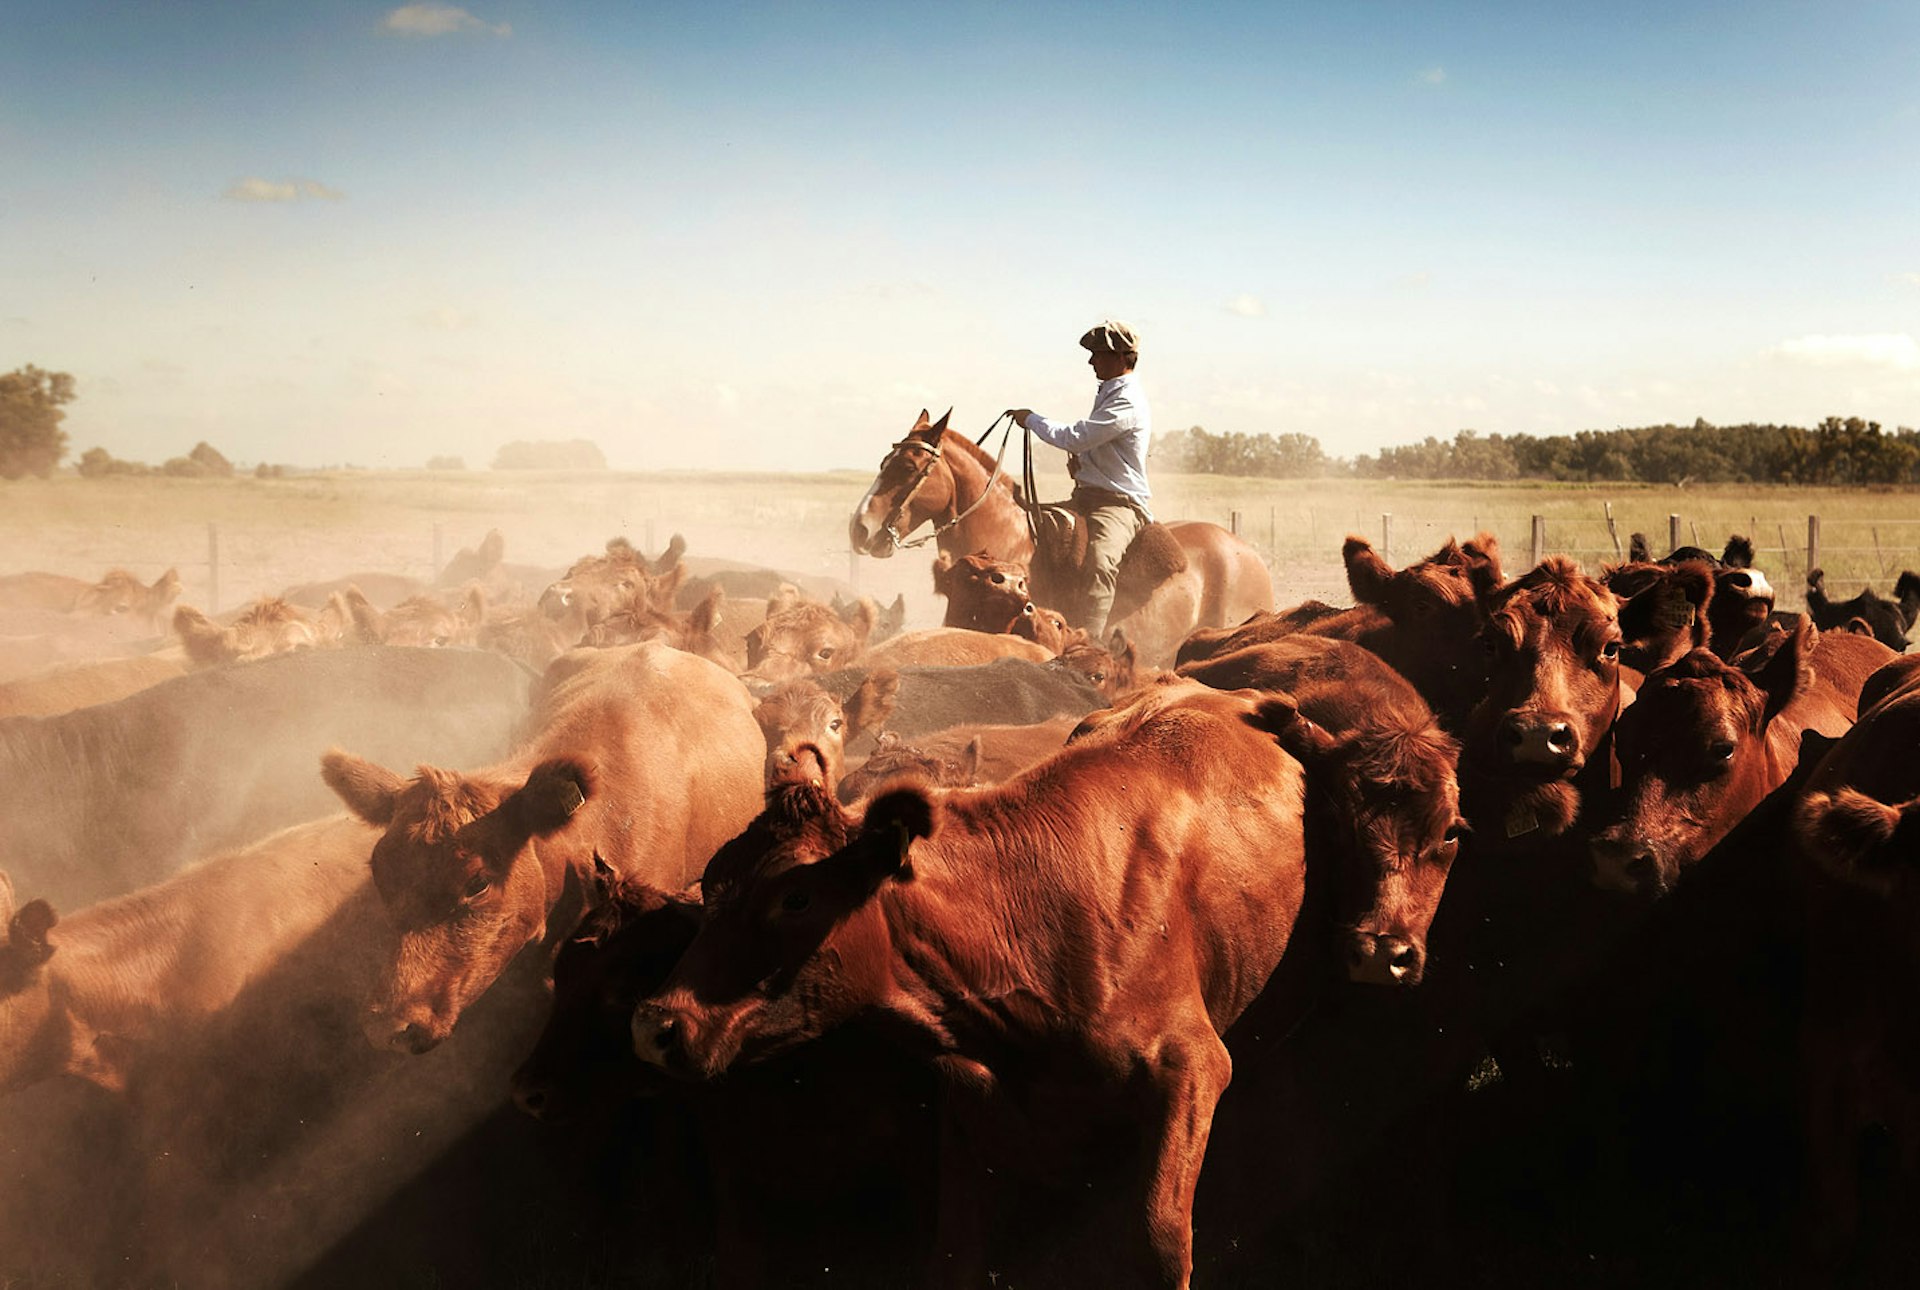 A gaucho (cowboy) rides a horse among a group of cows in a dusty countryside landscape